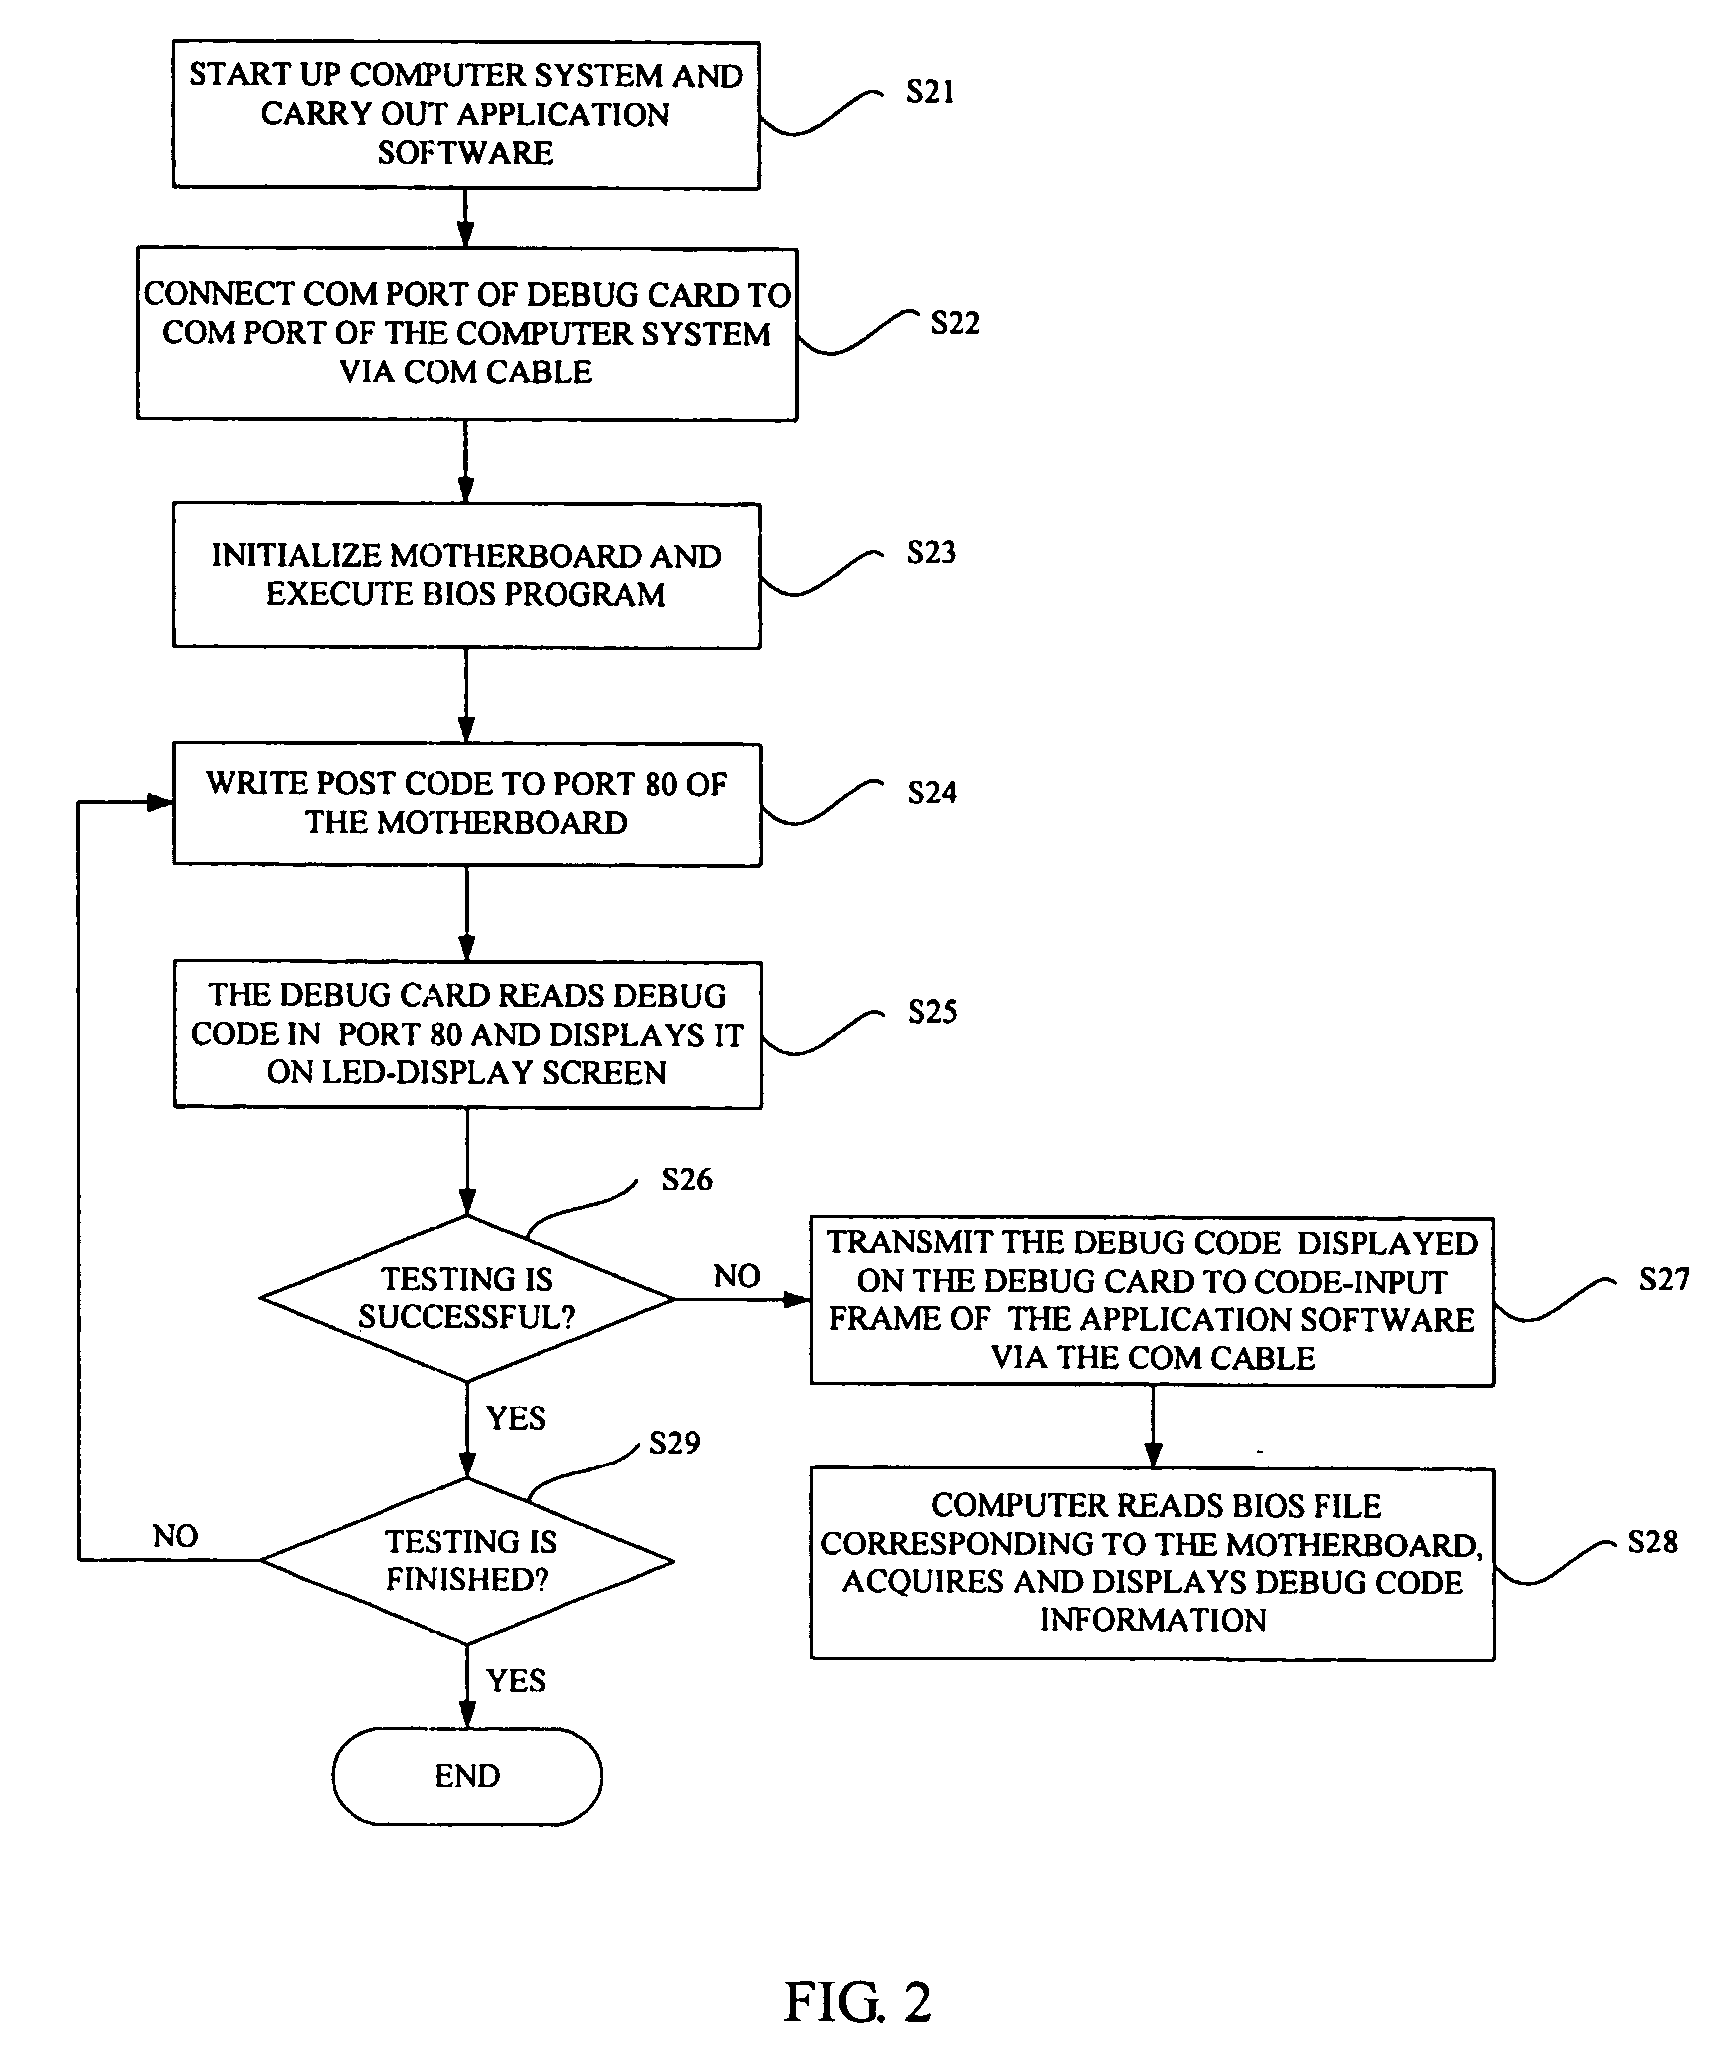 Method and system for acquiring definitions of debug code of a basic input/output system